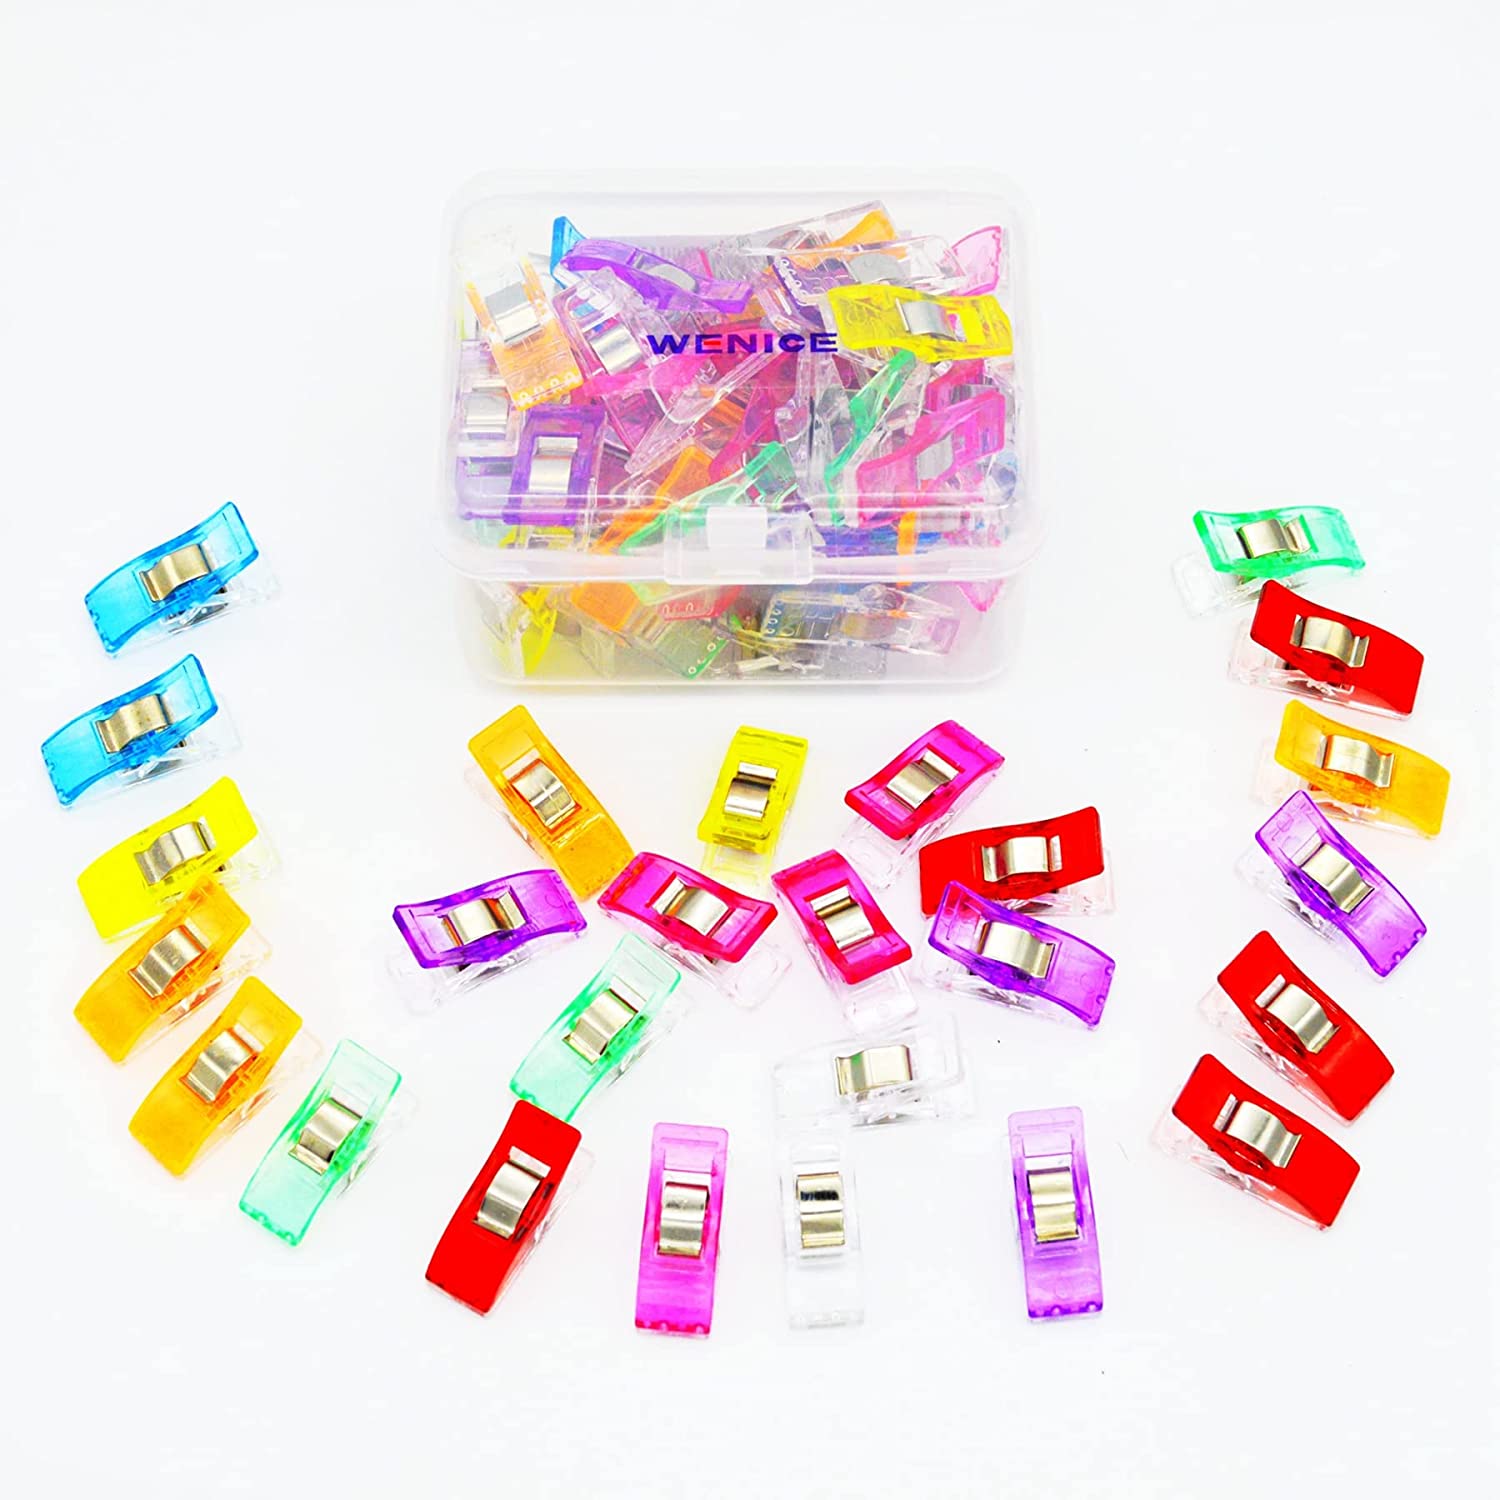 Coideal Large Sewing Fabric Clips 60 Pcs Jumbo Quilt Clips for Quilting  with Plastic Box Package Assorted Bright Colors (Multicolored) Large  Multicolored